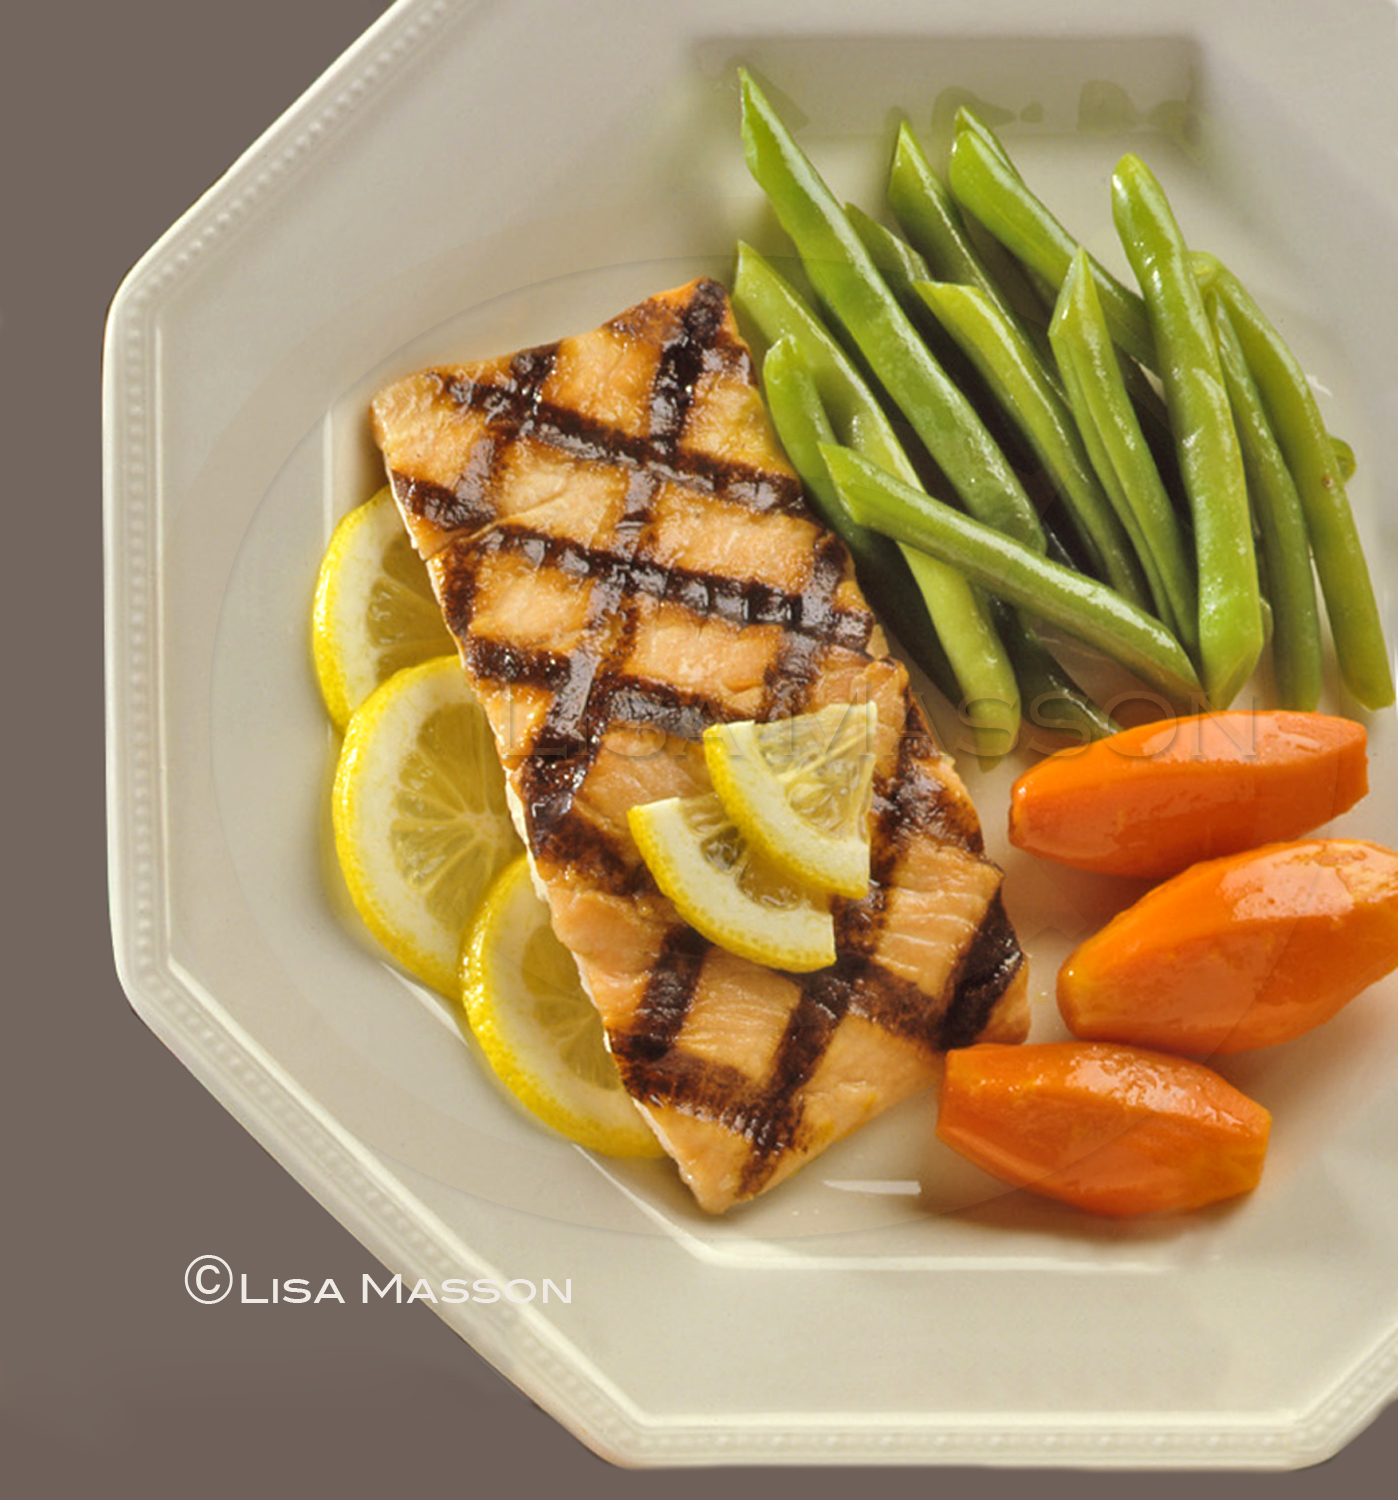 Grilled Salmon with Green Beans and Carrots - Pat Marshall Design